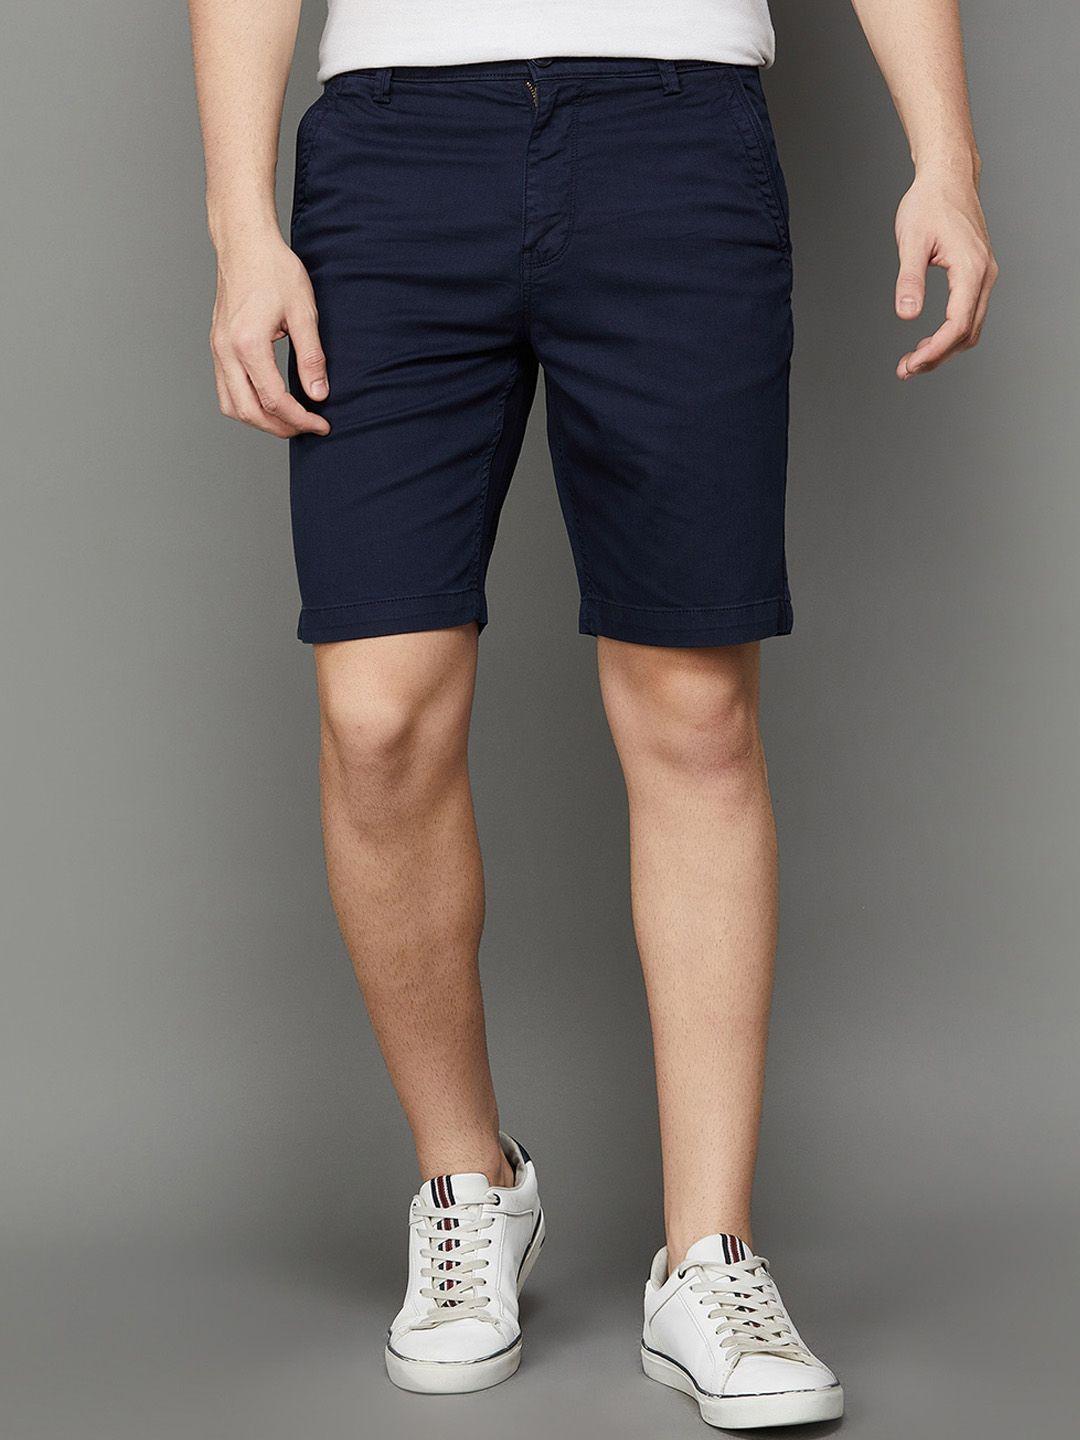 fame-forever-by-lifestyle-men-mid-rise-shorts